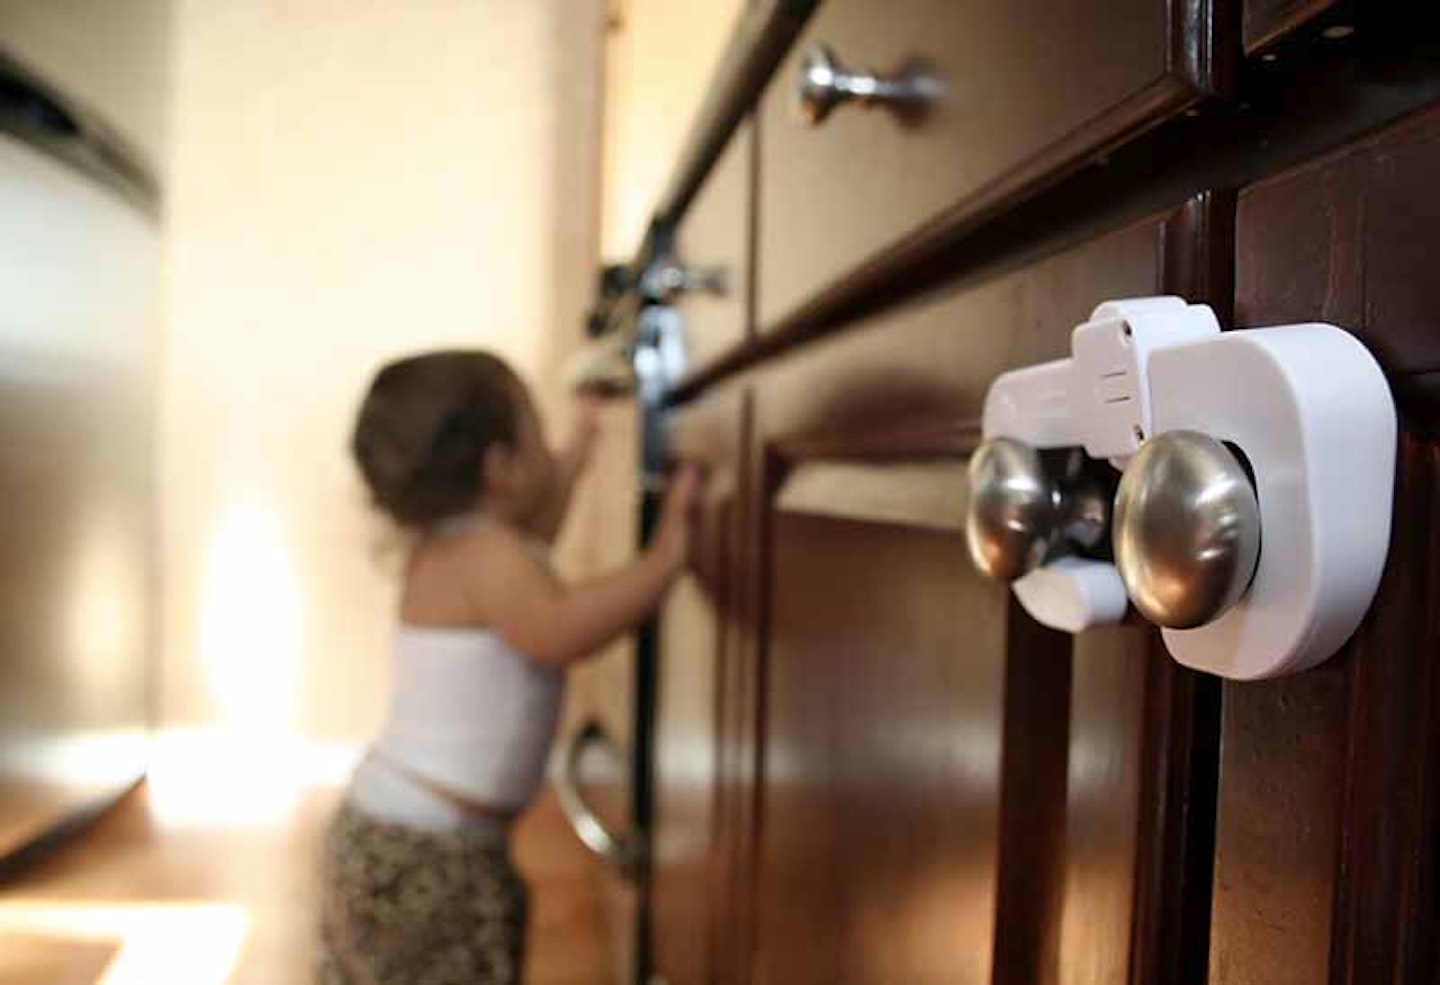 12 Essential Baby Protection Products For The Home 